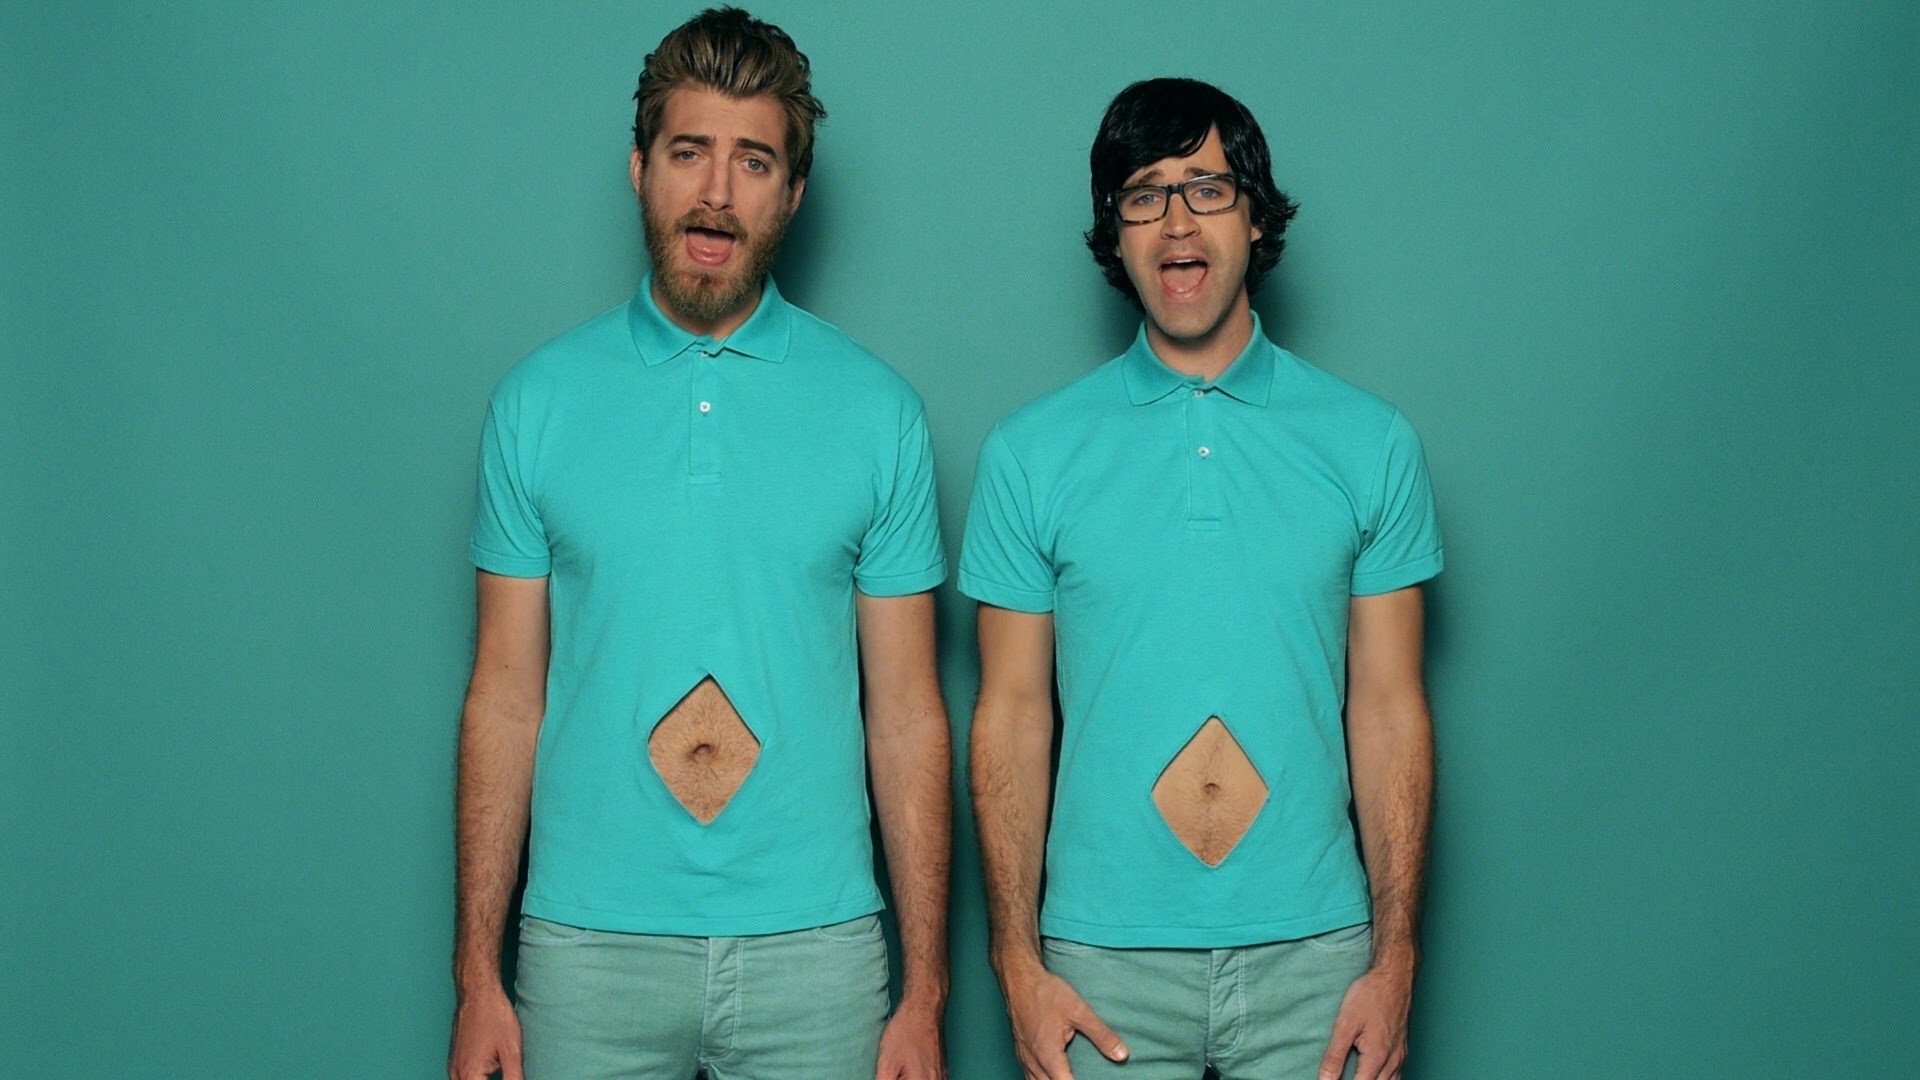 Good Mythical Morning: The song 'It's My Belly Button' by Rhett McLaughlin and Link Neal, An American comic duo. 1920x1080 Full HD Wallpaper.